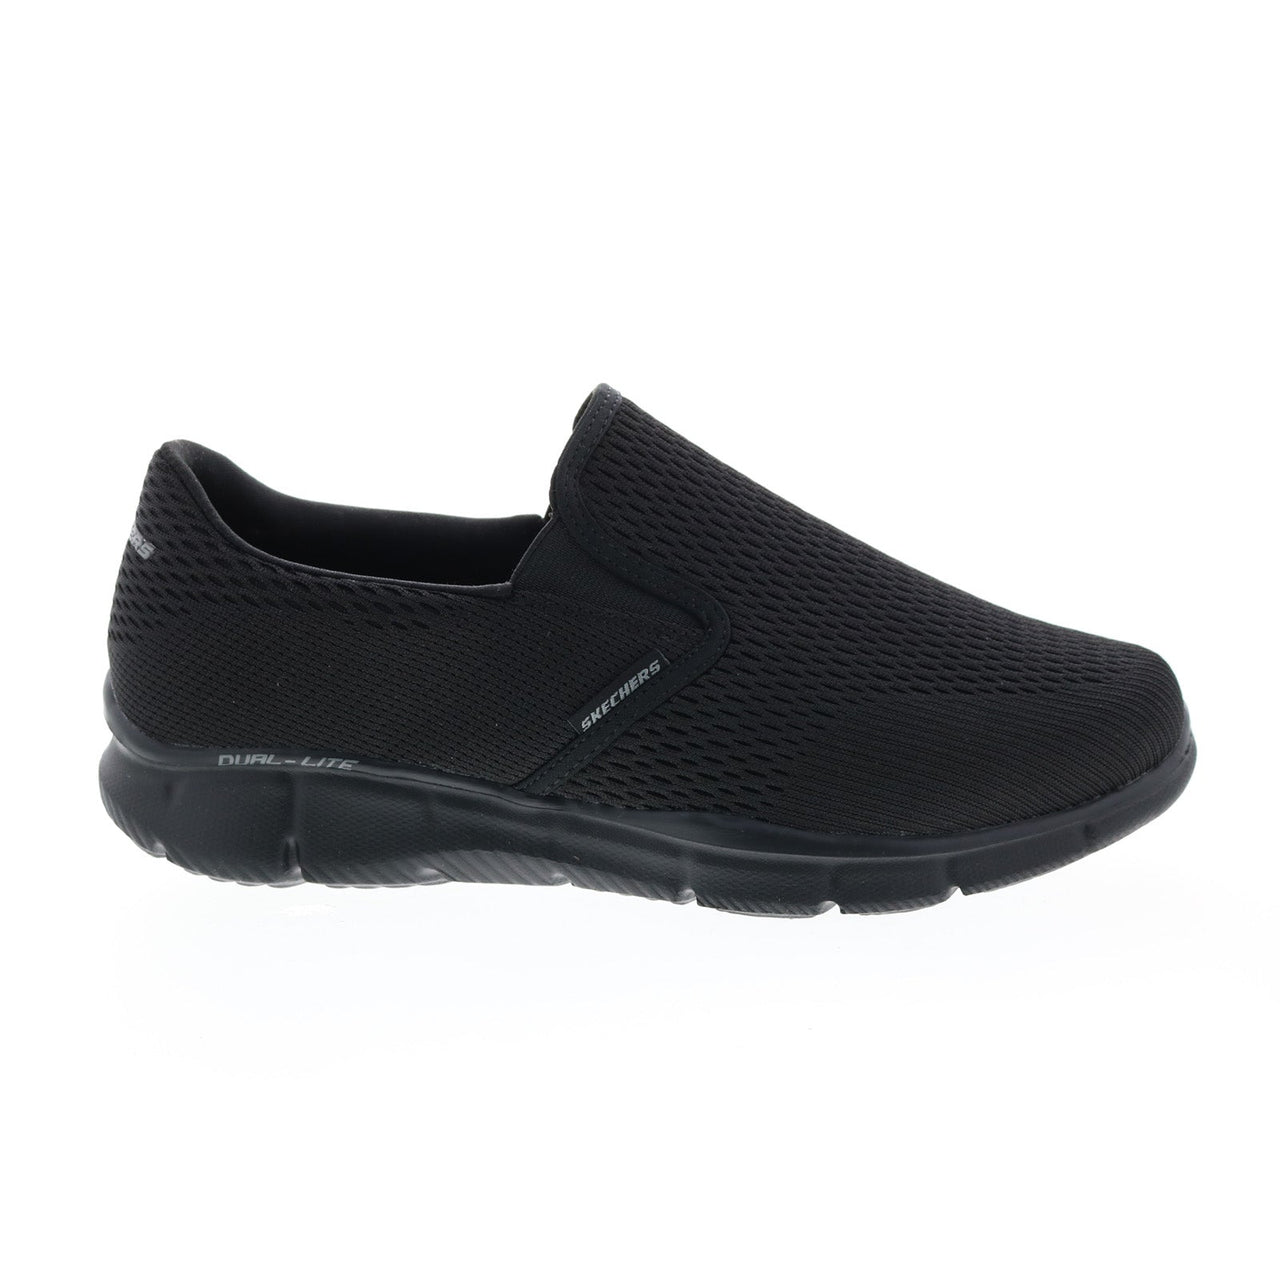 Skechers Equalizer 51503 Mens Black Canvas Loafers & Slip Ons Casual S ...